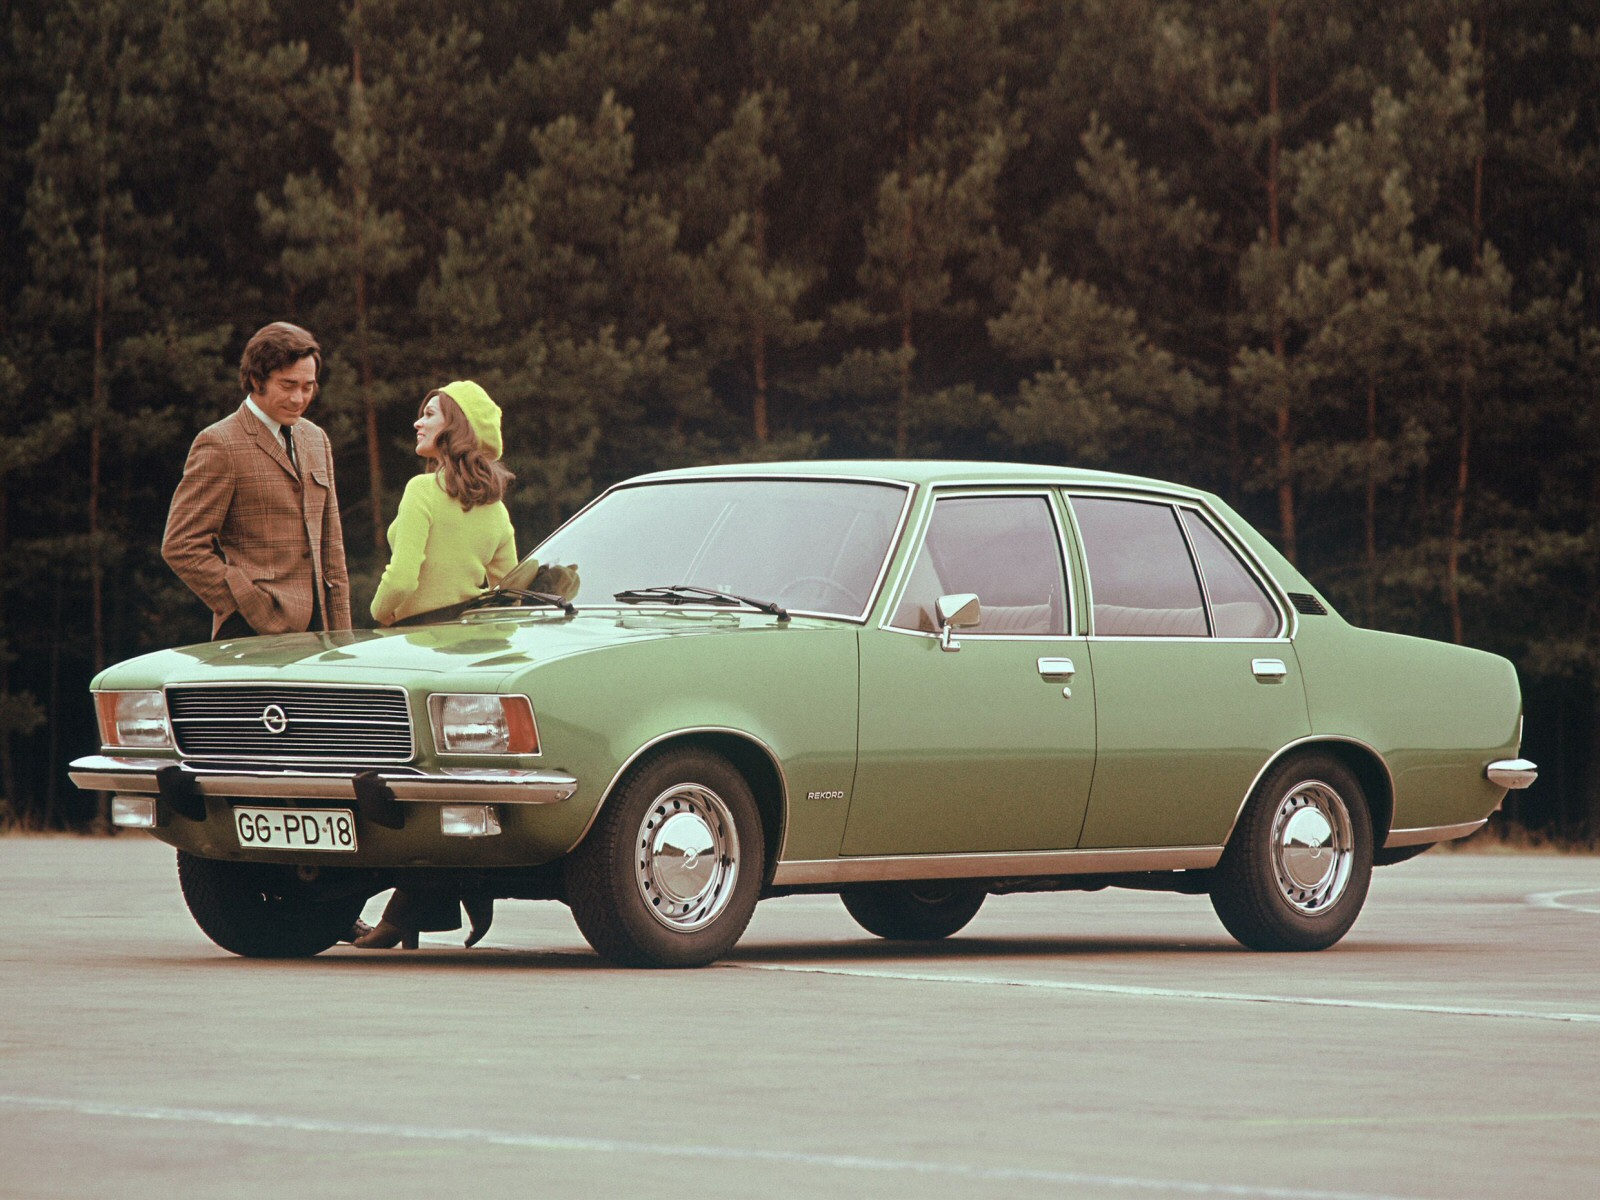 1972 Opel Rekord model and photos